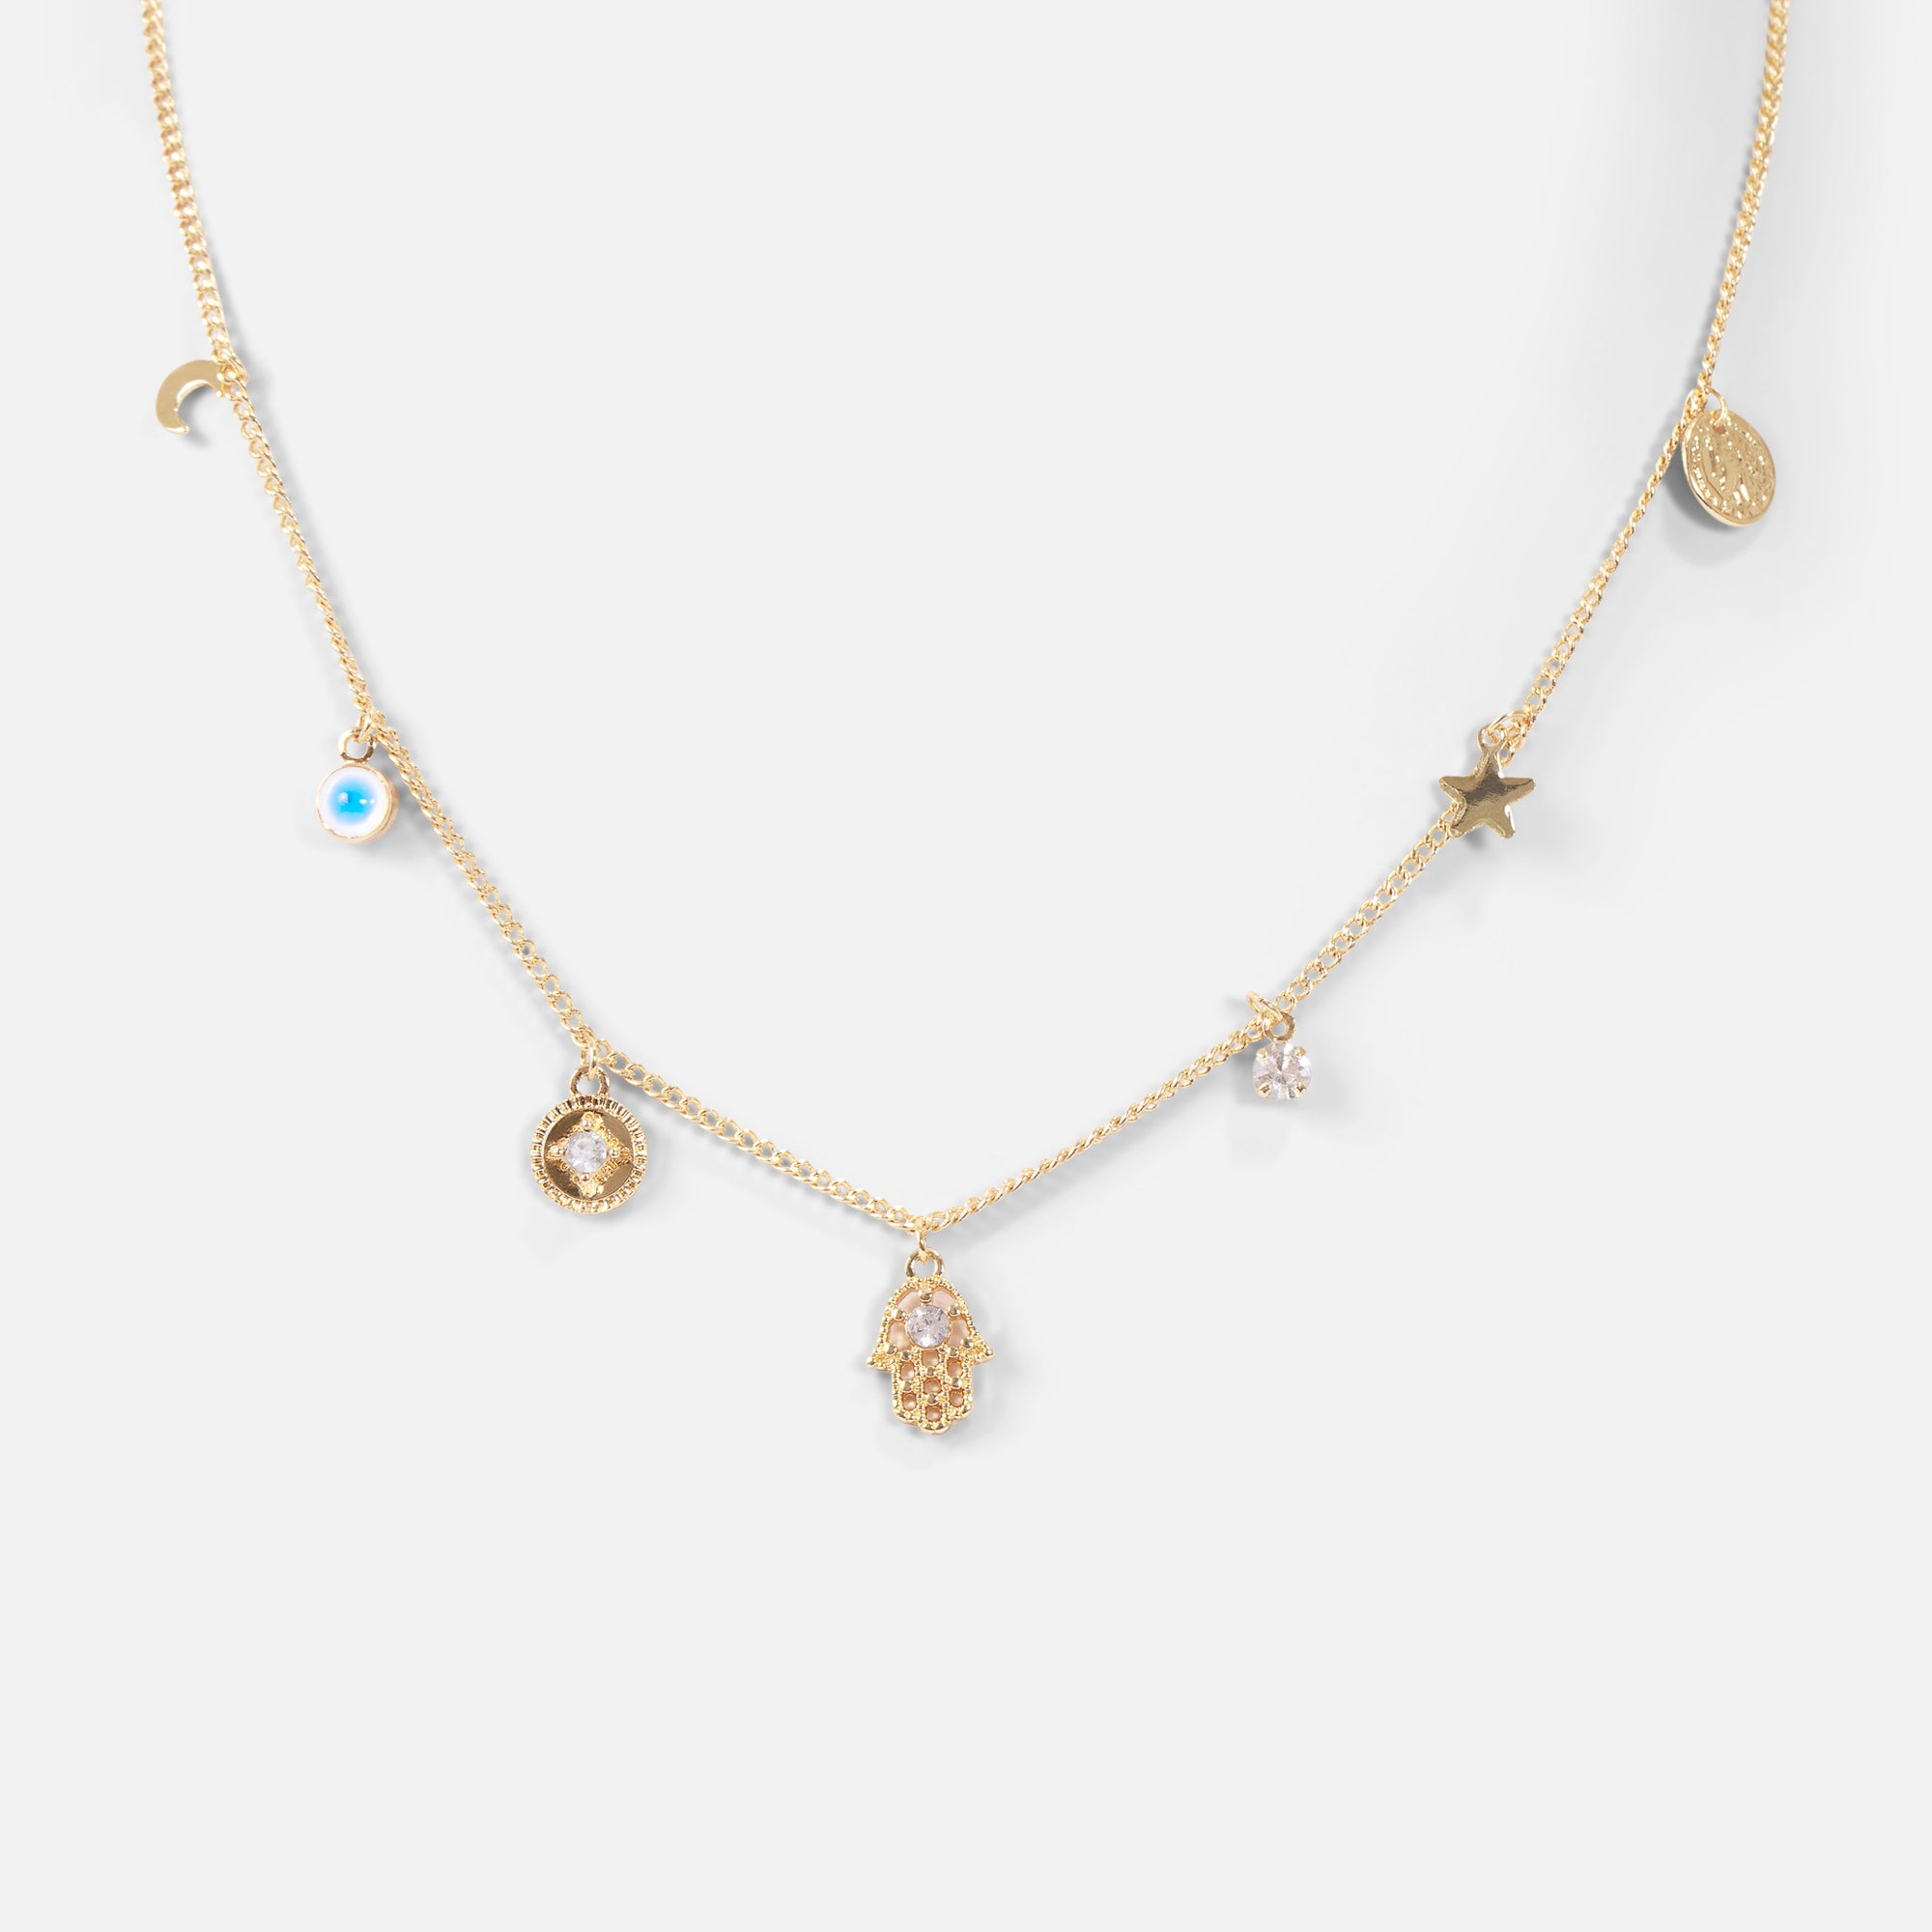 Golden necklace with spiritual charms